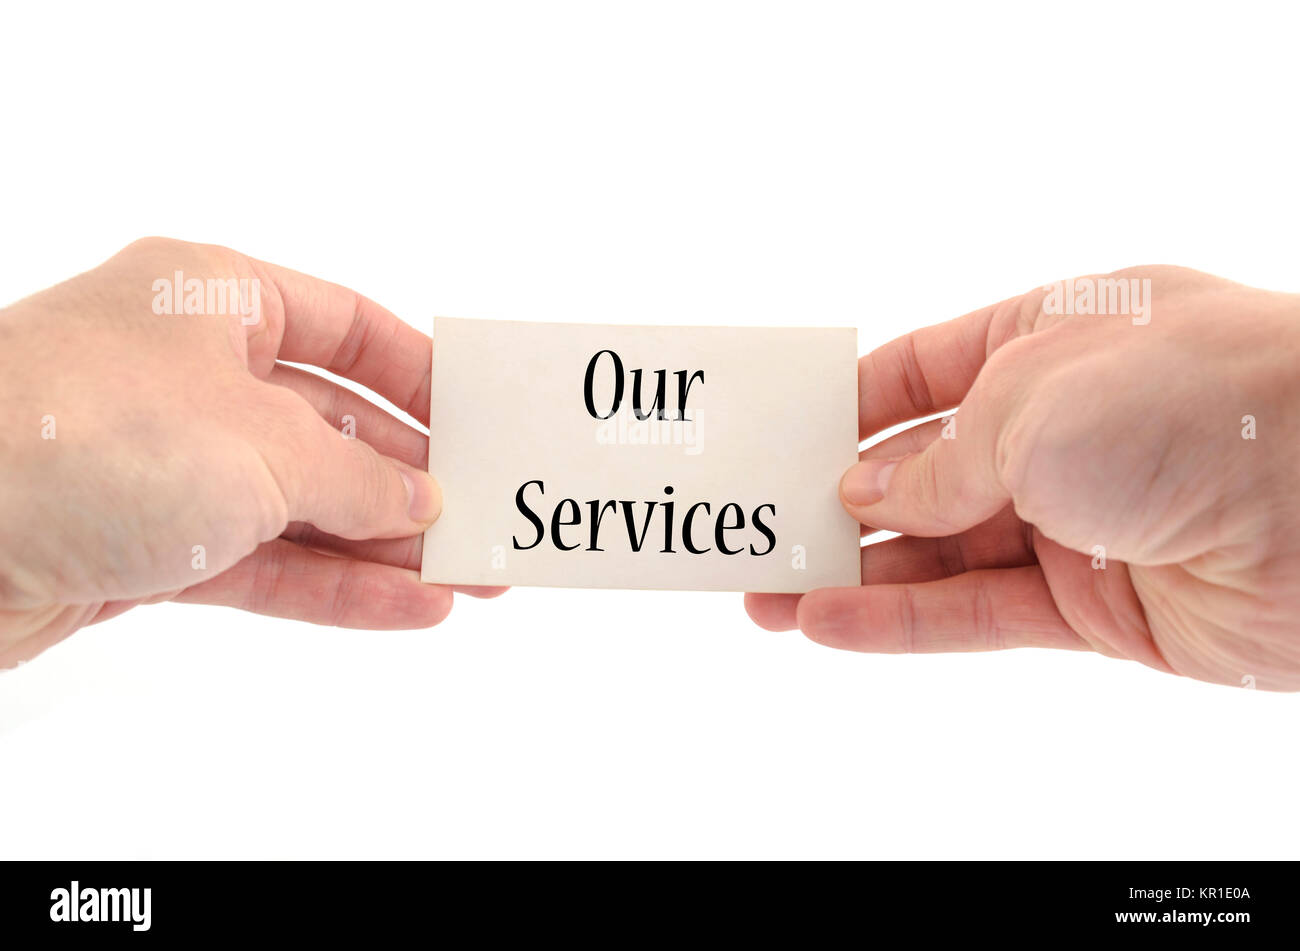 Our services text concept Stock Photo